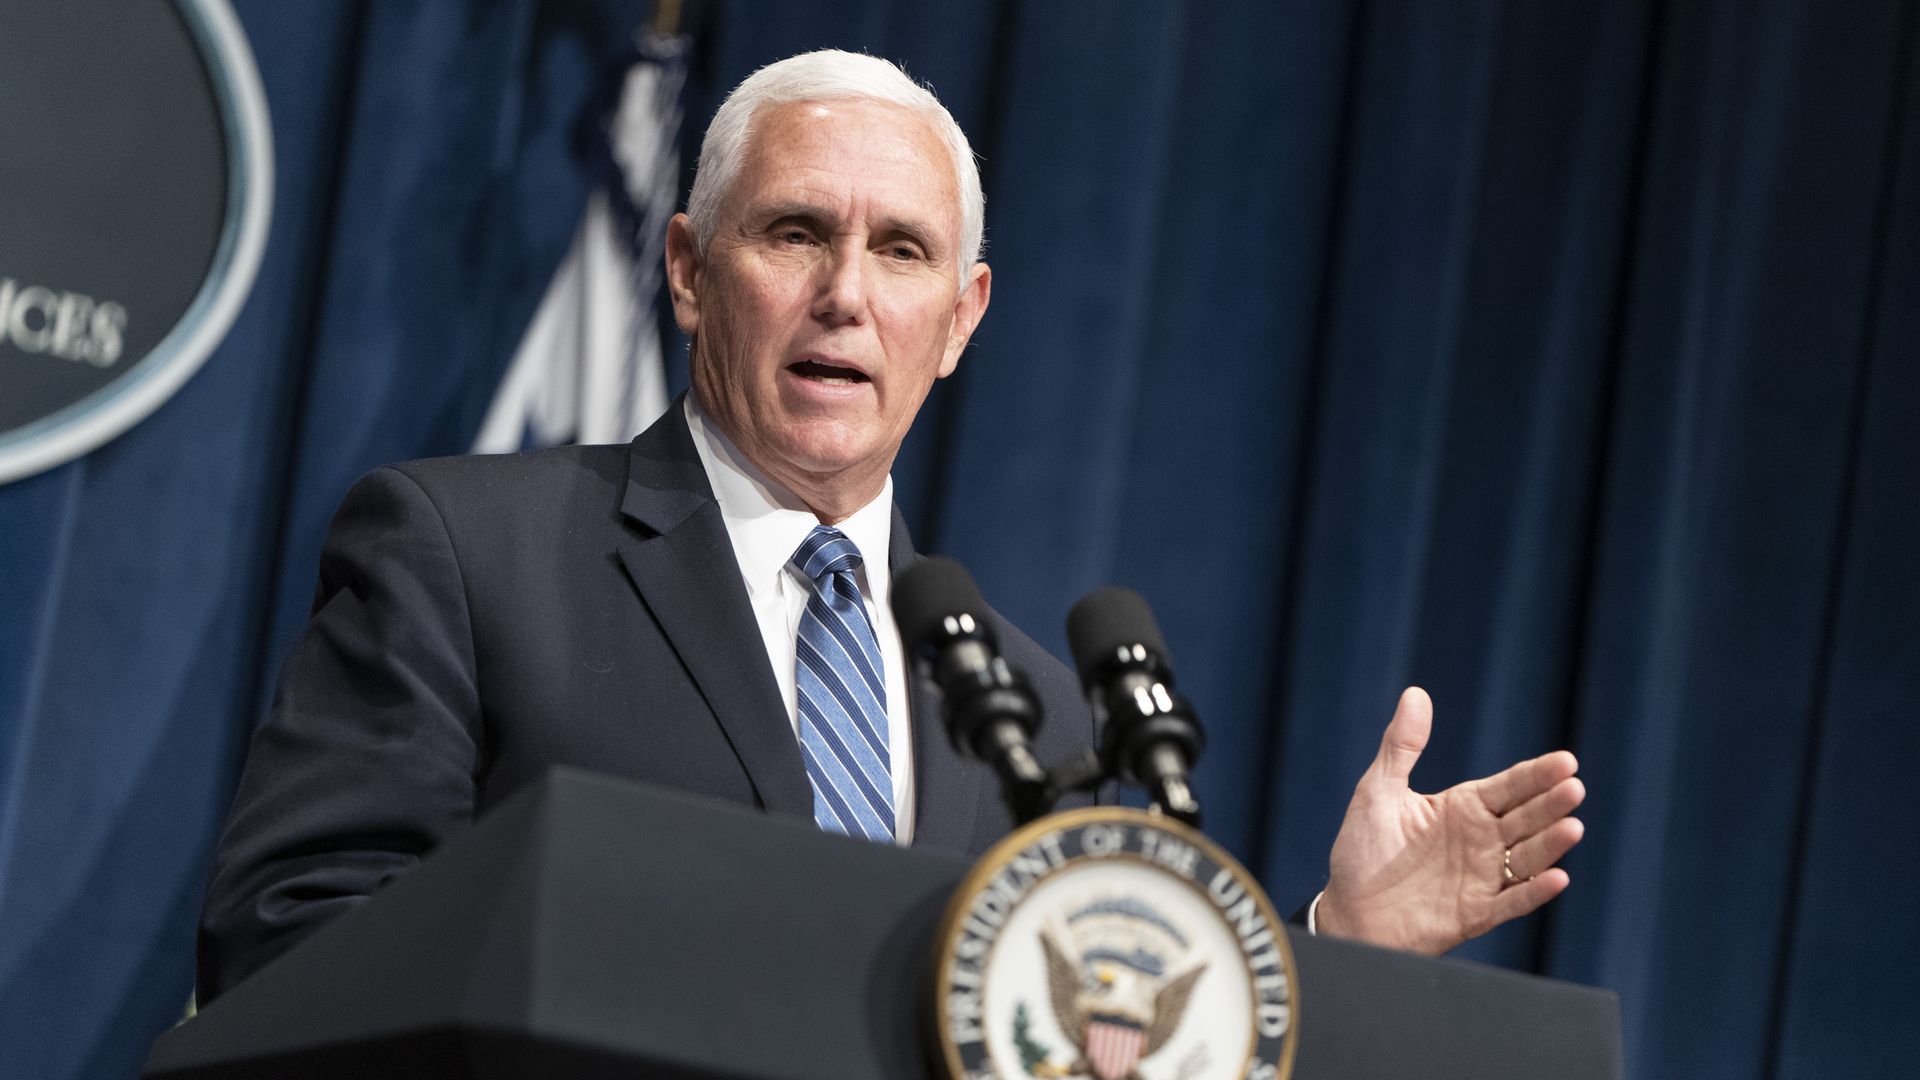 Vice President Mike Pence speaking at the podium during a press conference